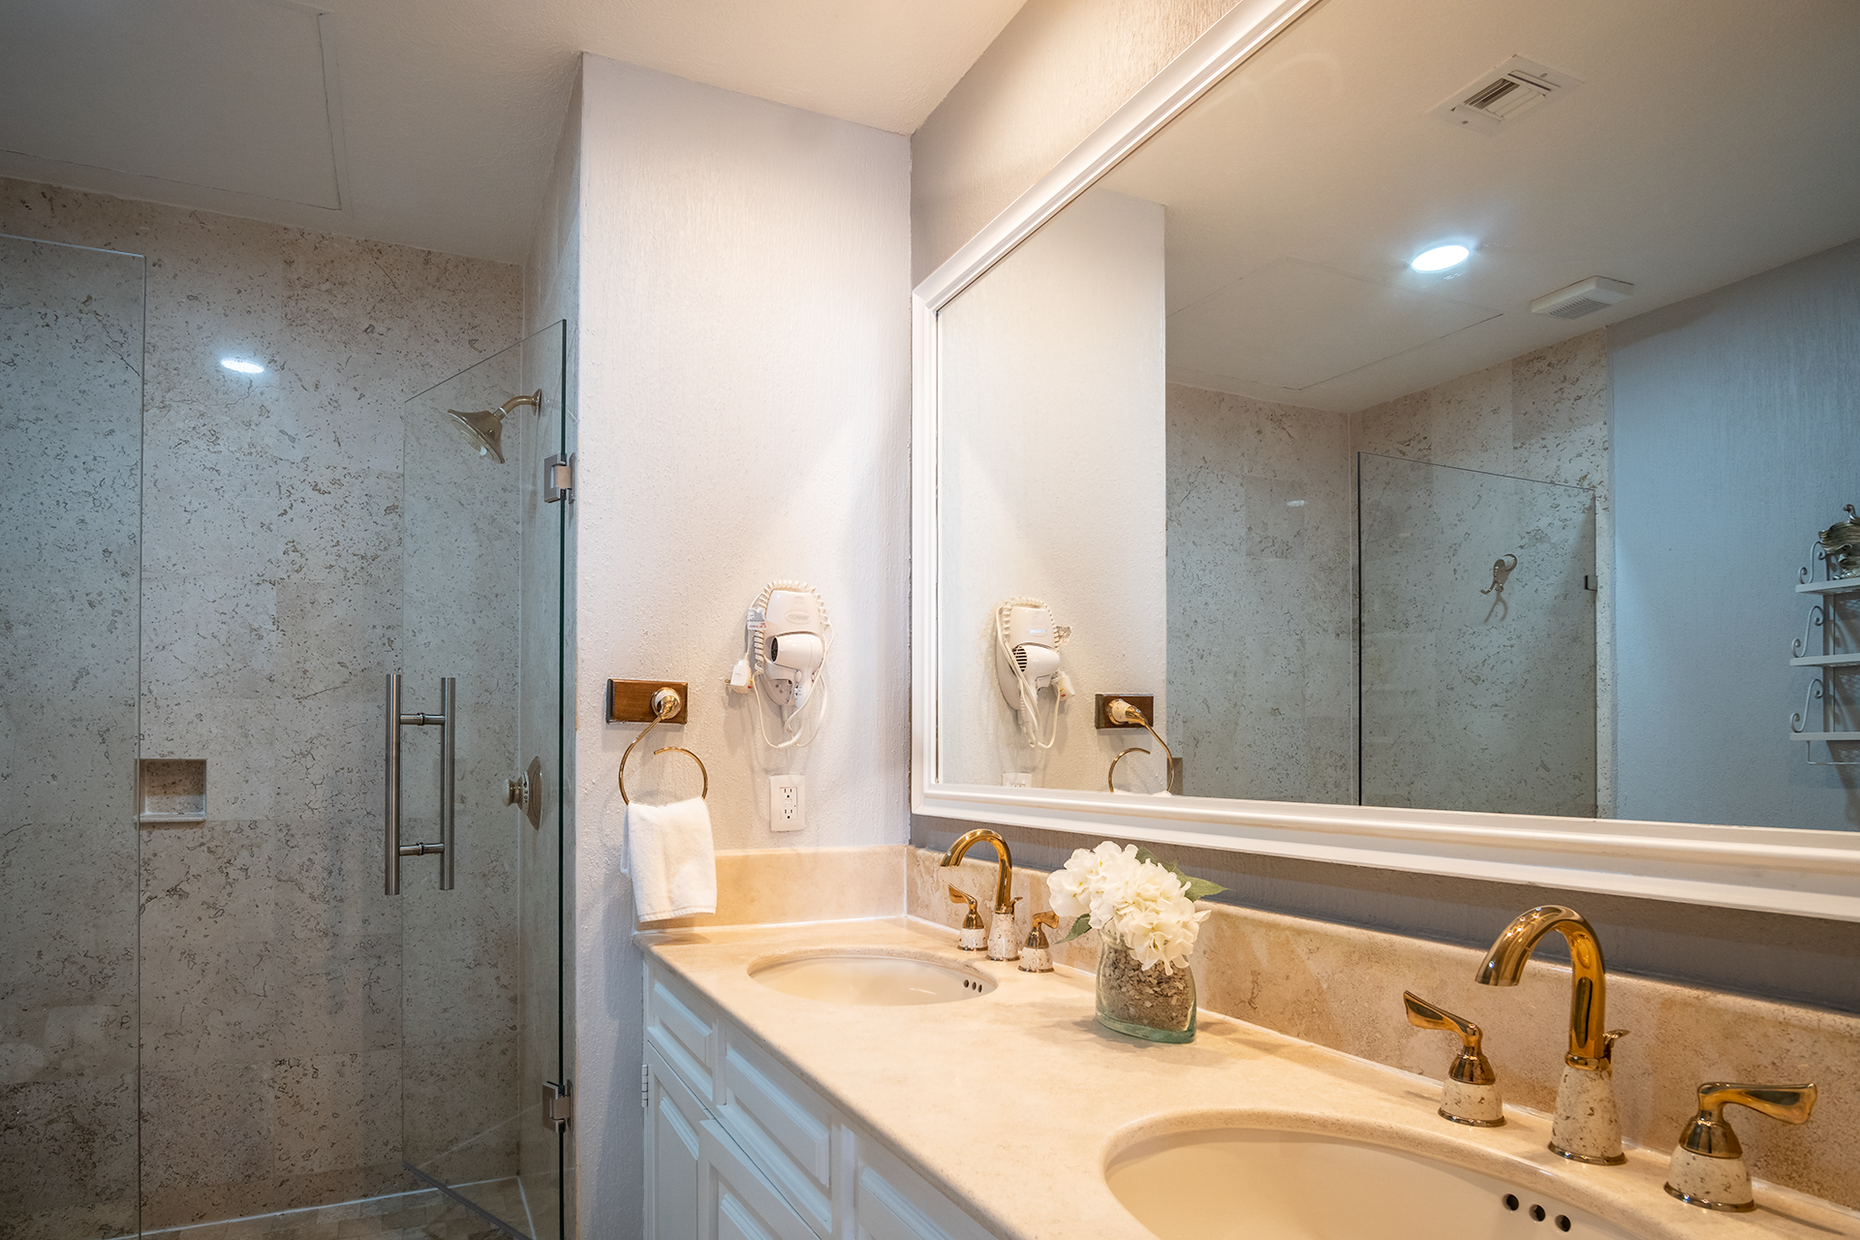 the main bathroom has a double sink vanity, and glass shower stall